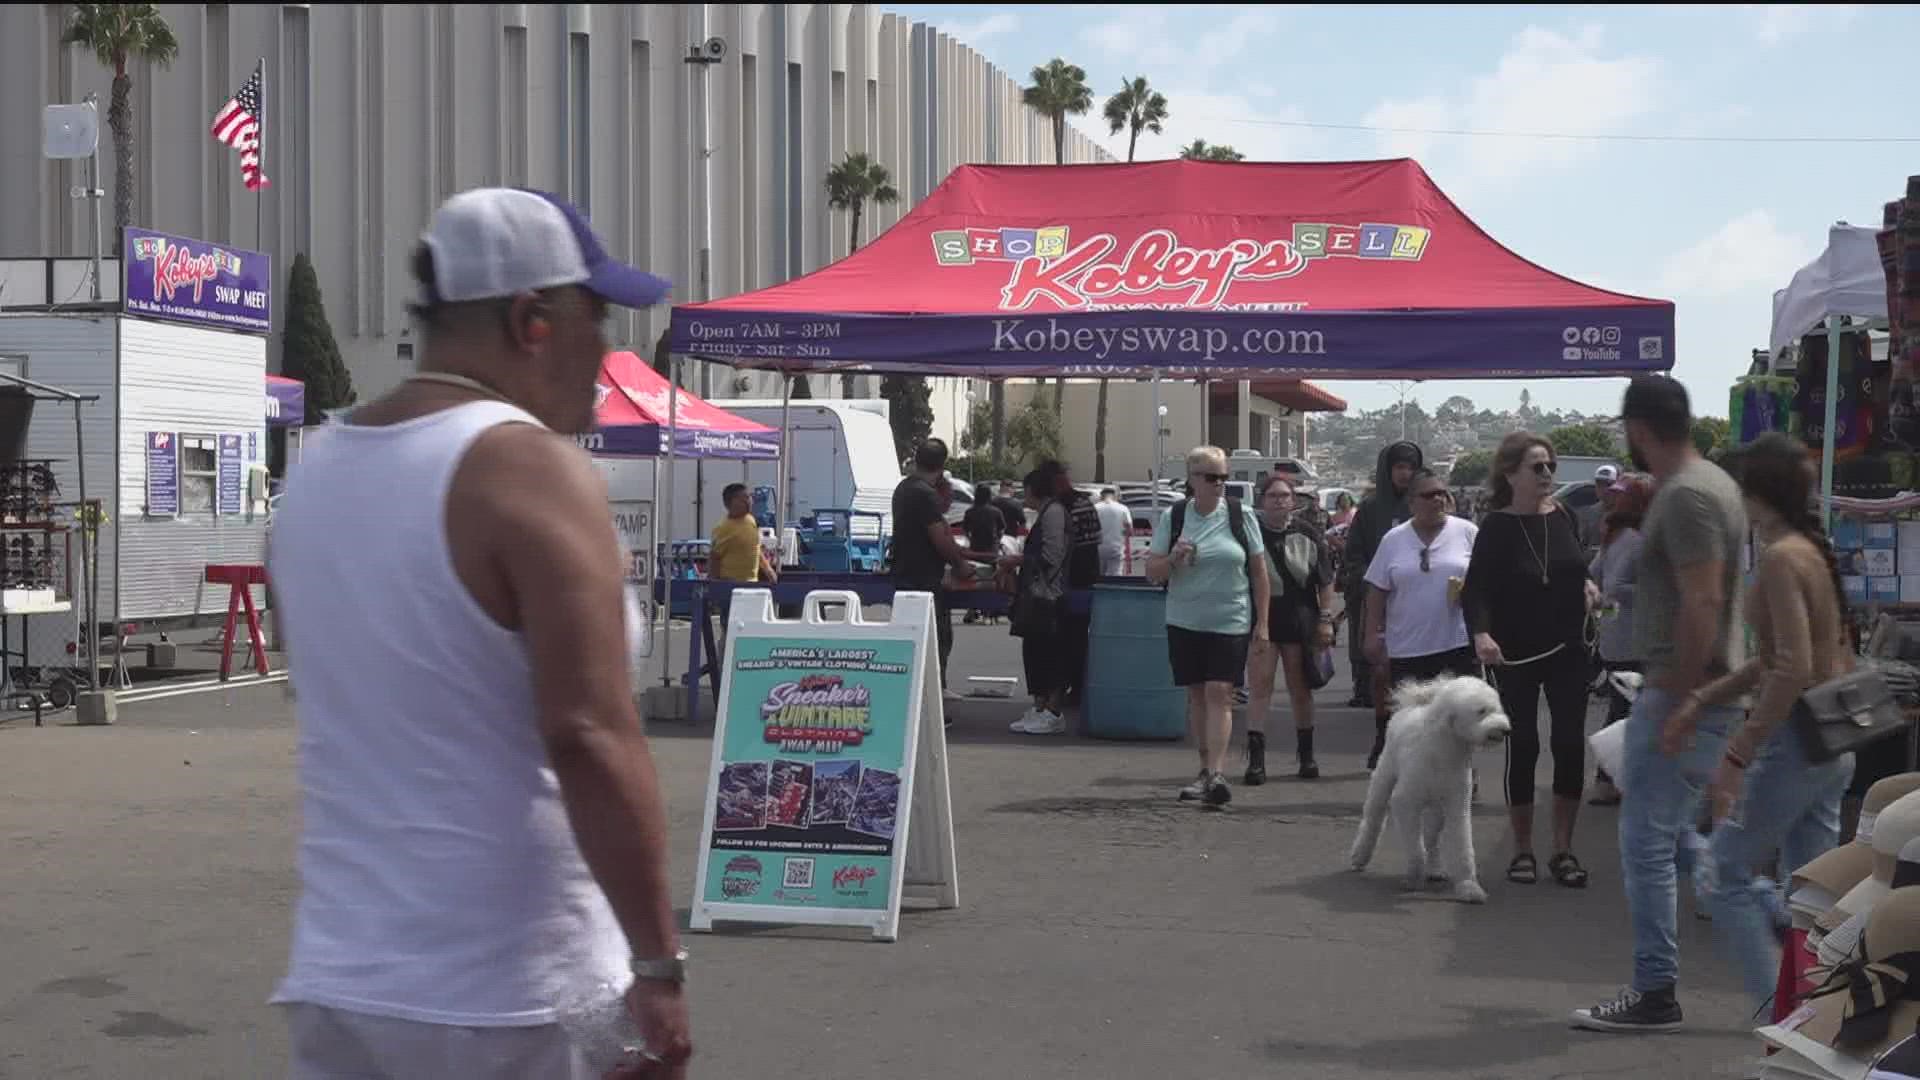 As San Diego continues negotiations for the redevelopment of the old sports arena, those that could be in jeopardy of closing their business are swap meet vendors.